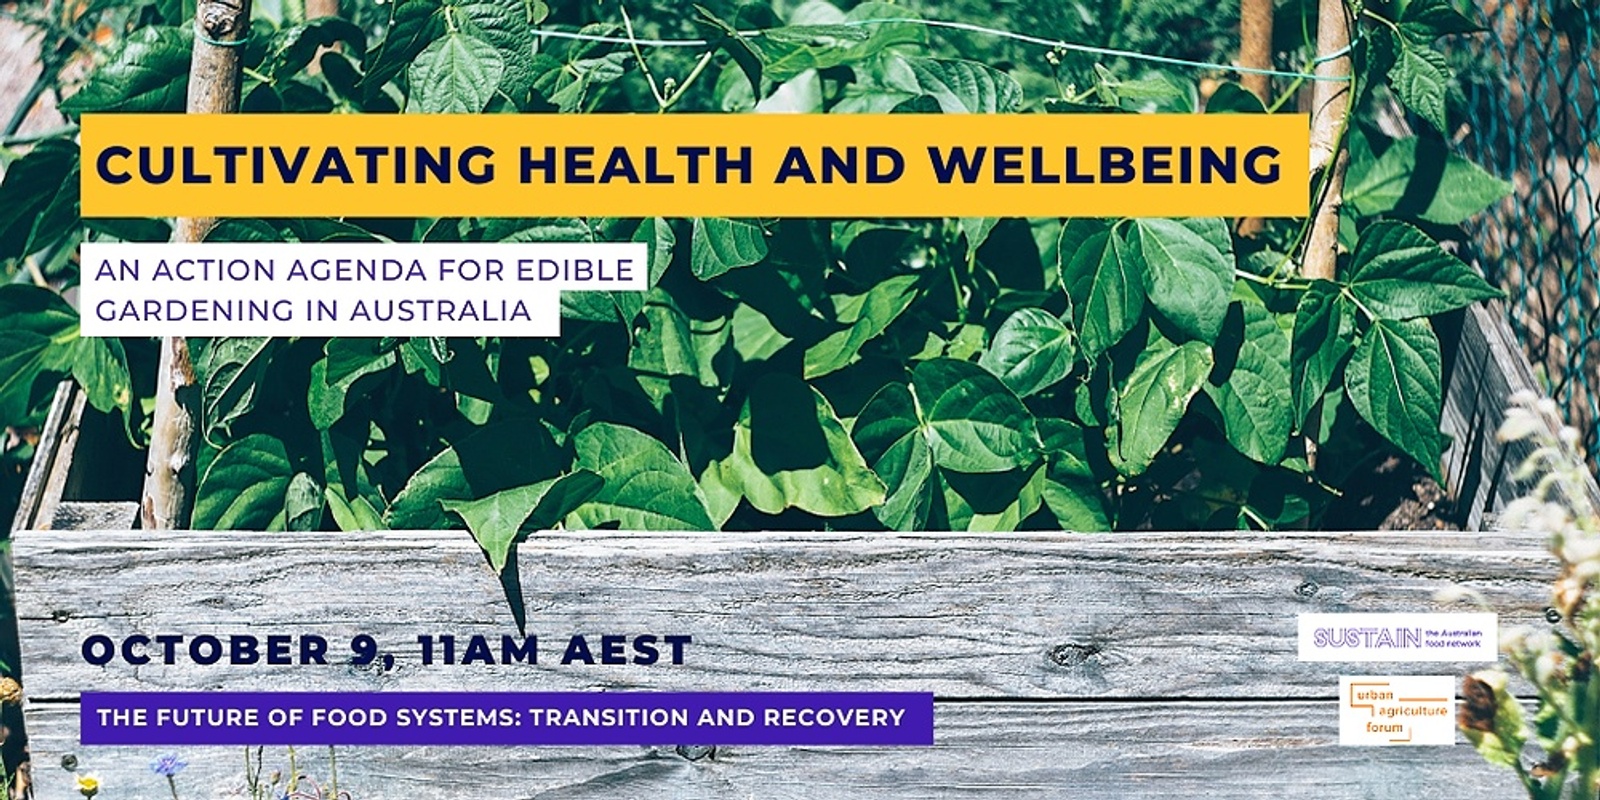 Cultivating Health and Wellbeing: An Action Agenda for Edible Gardening in Australia